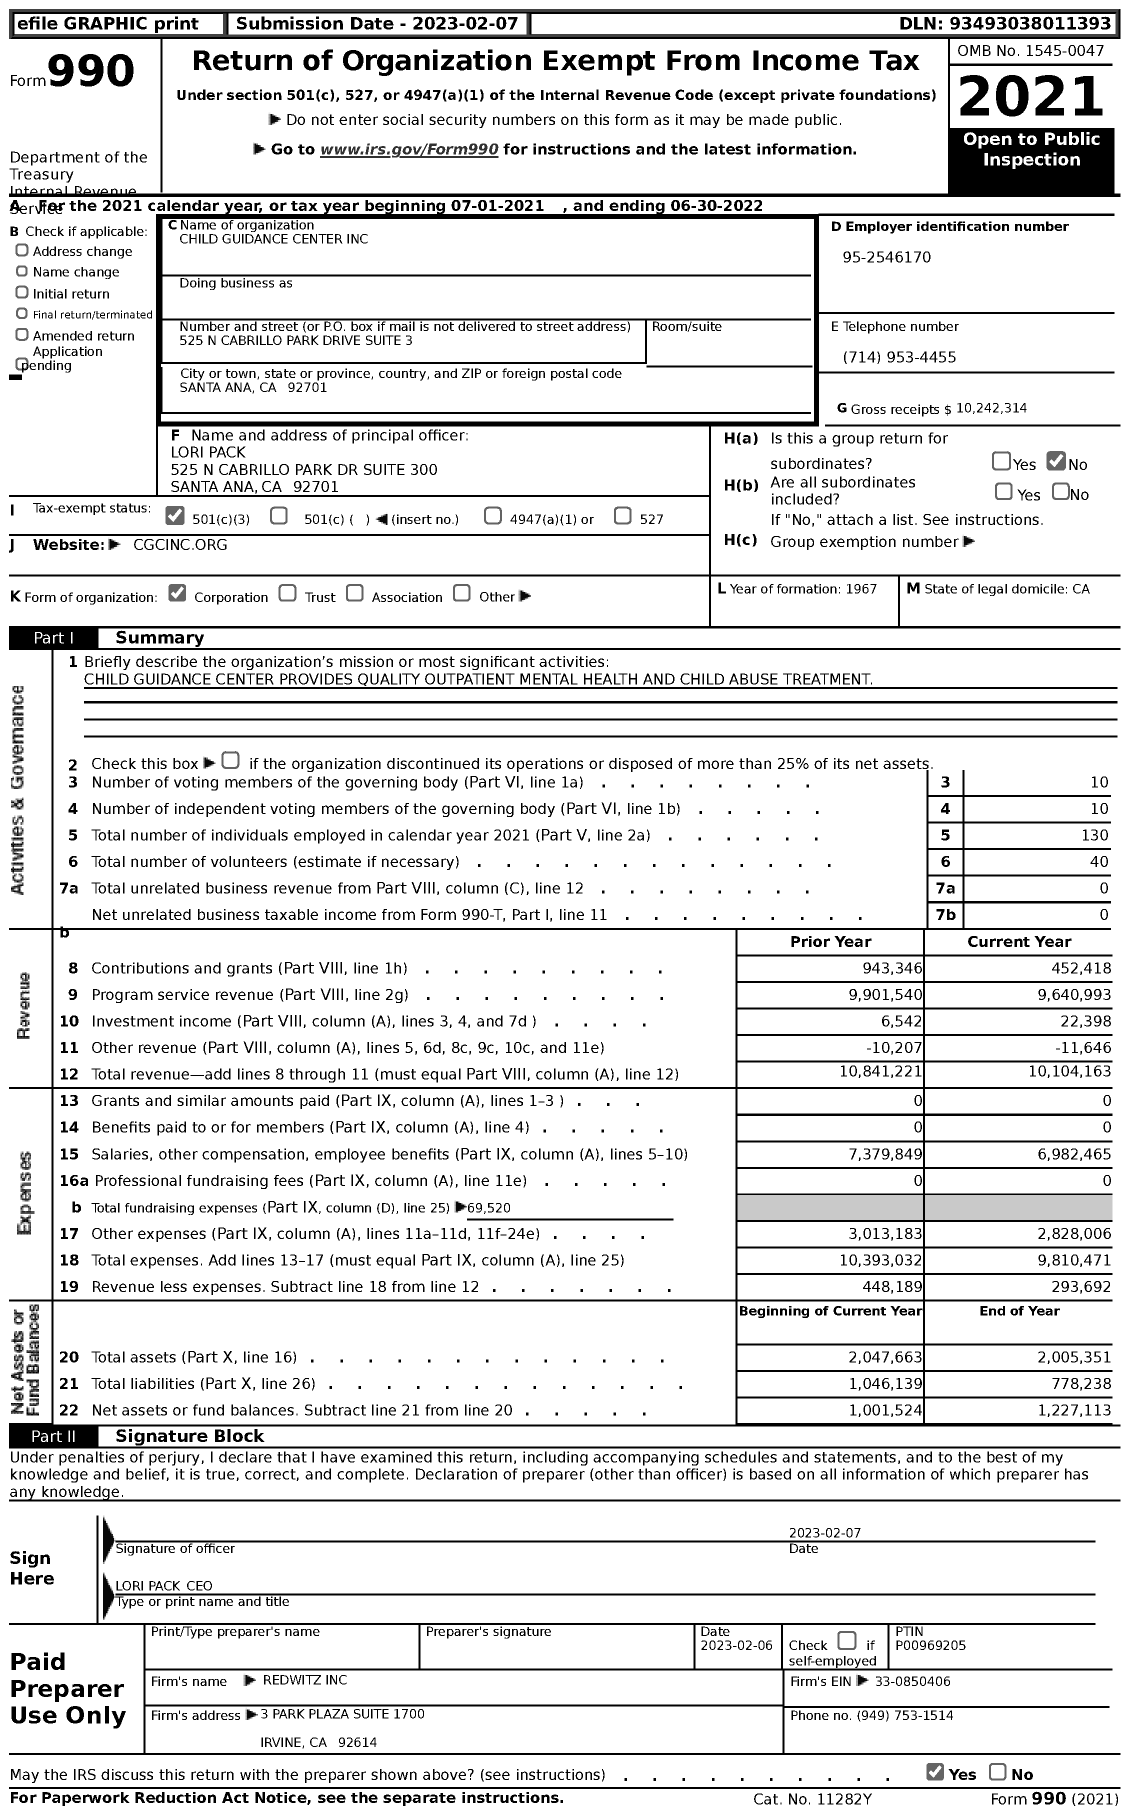 Image of first page of 2021 Form 990 for Child Guidance Center (CGC)